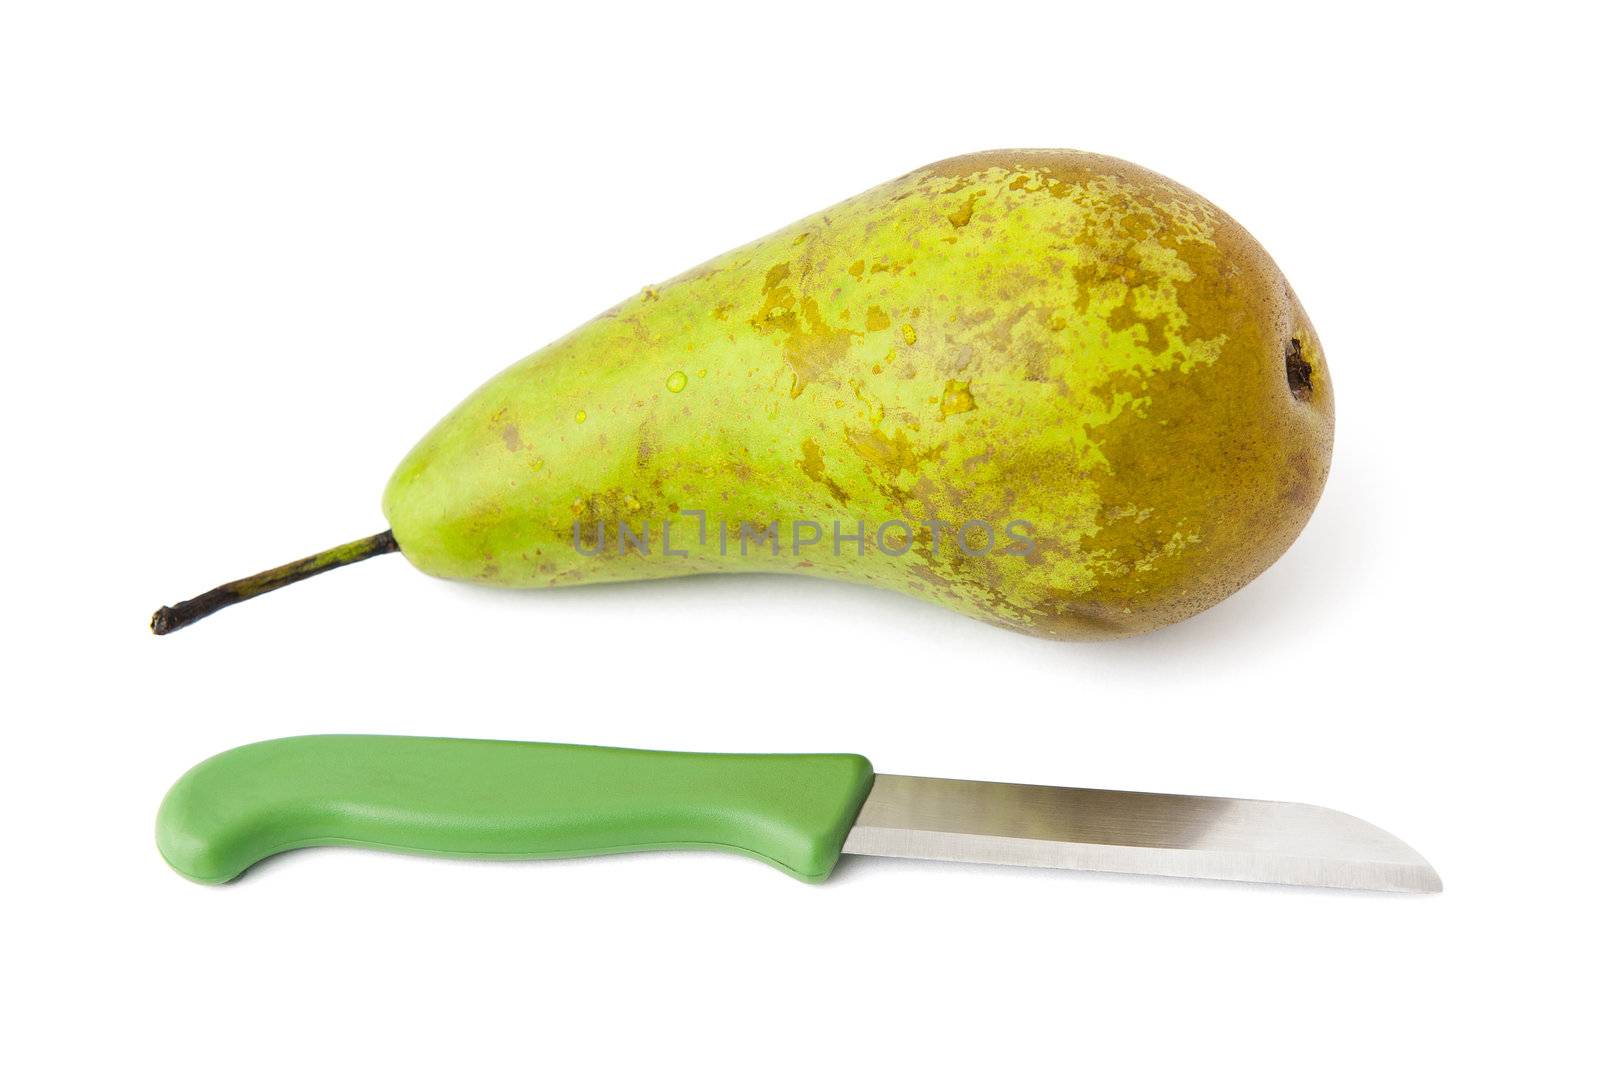 Pear and knife isolated on the white background